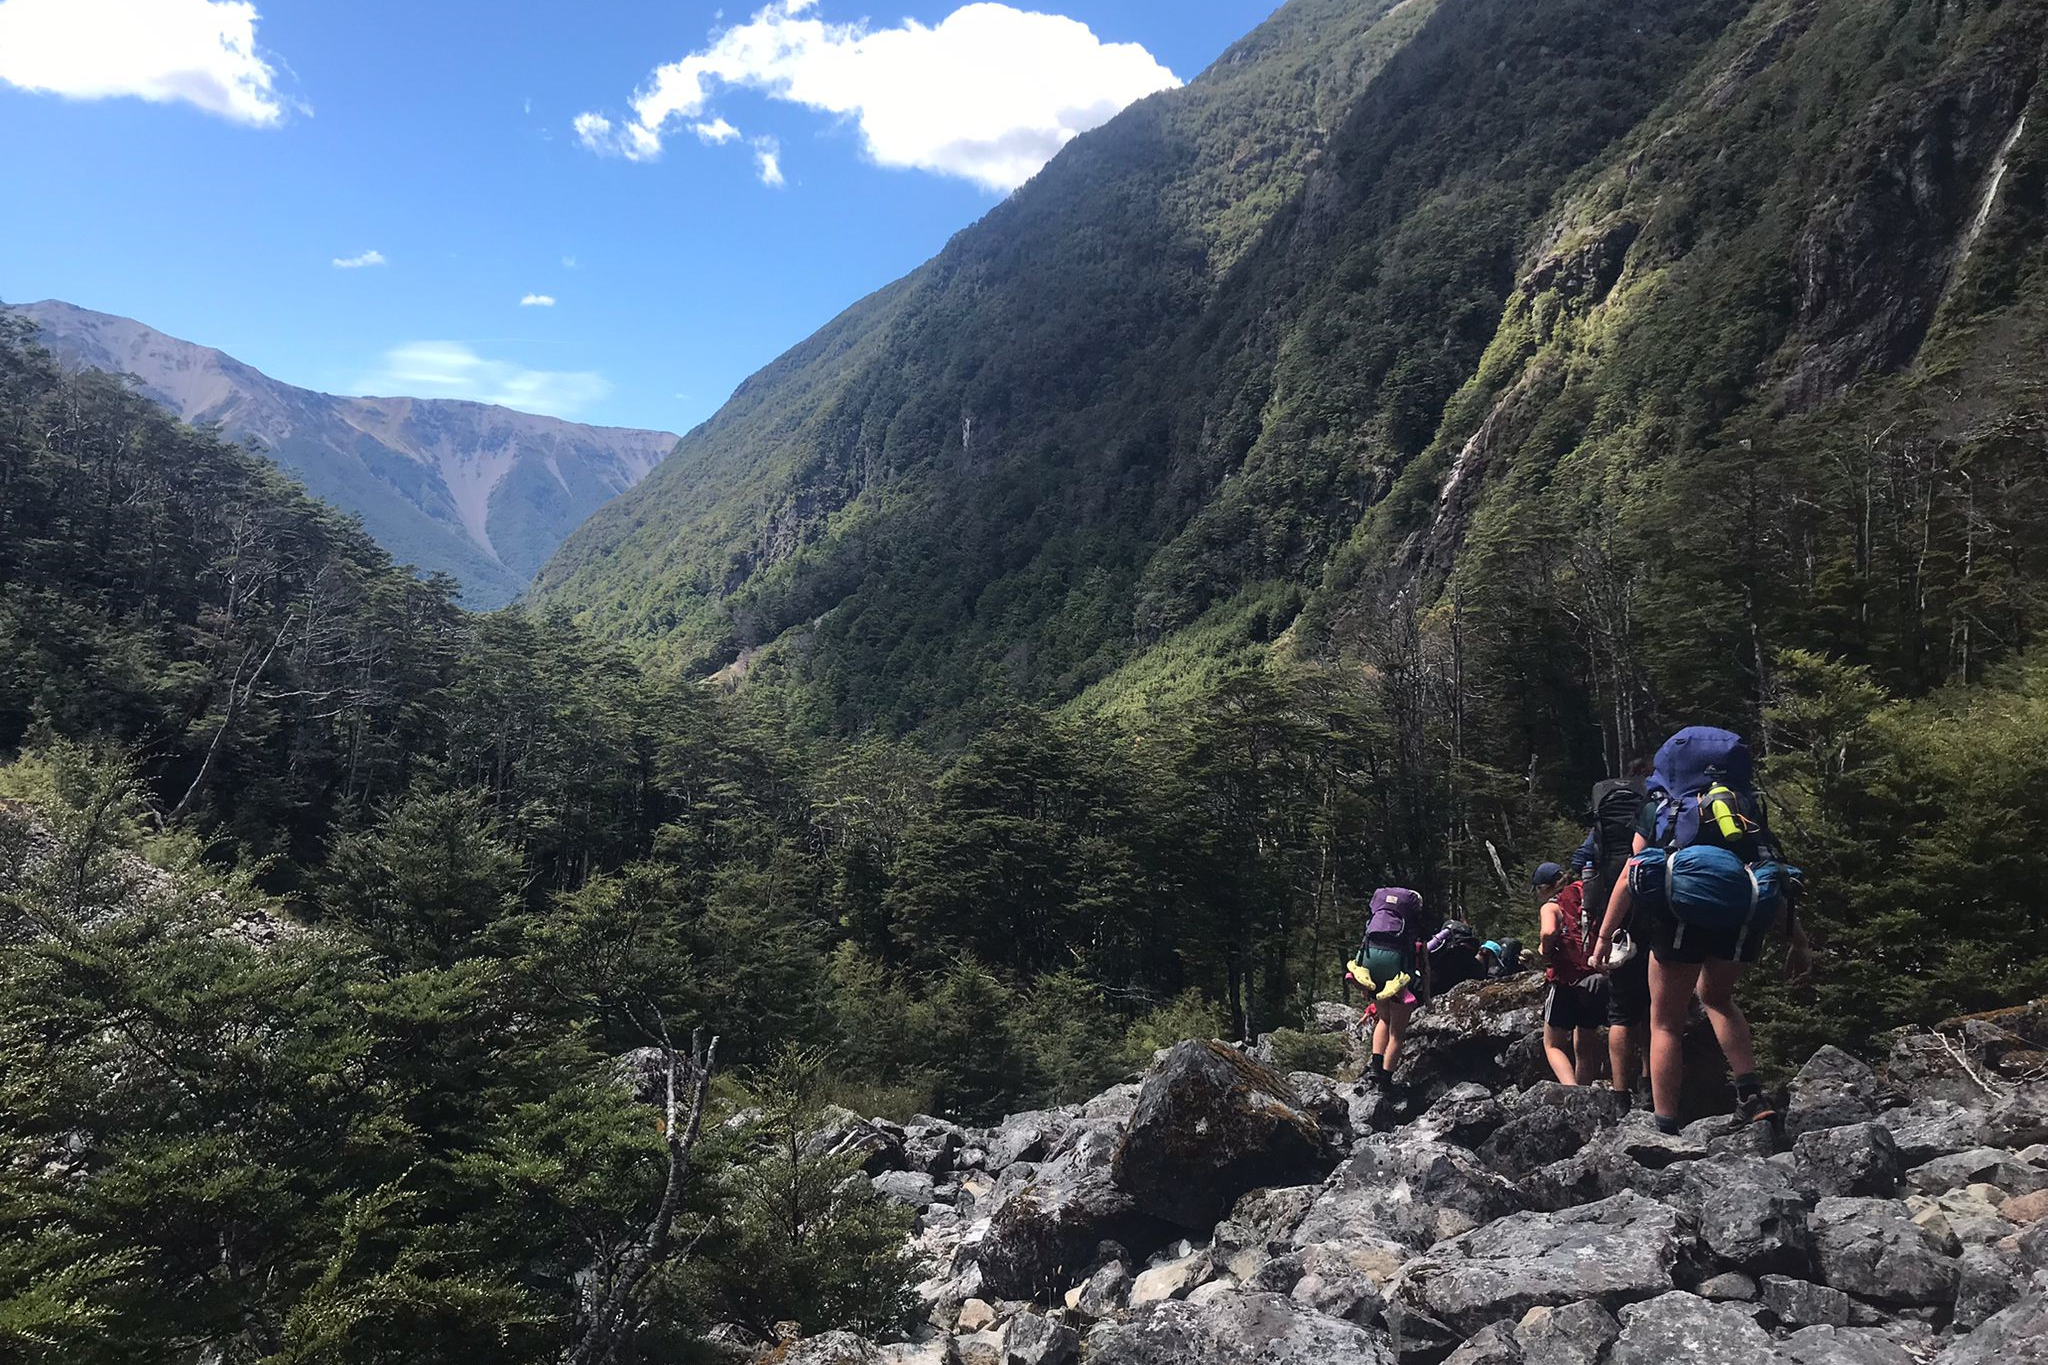 Participants with heavy packs walk over boulders in a valley floor